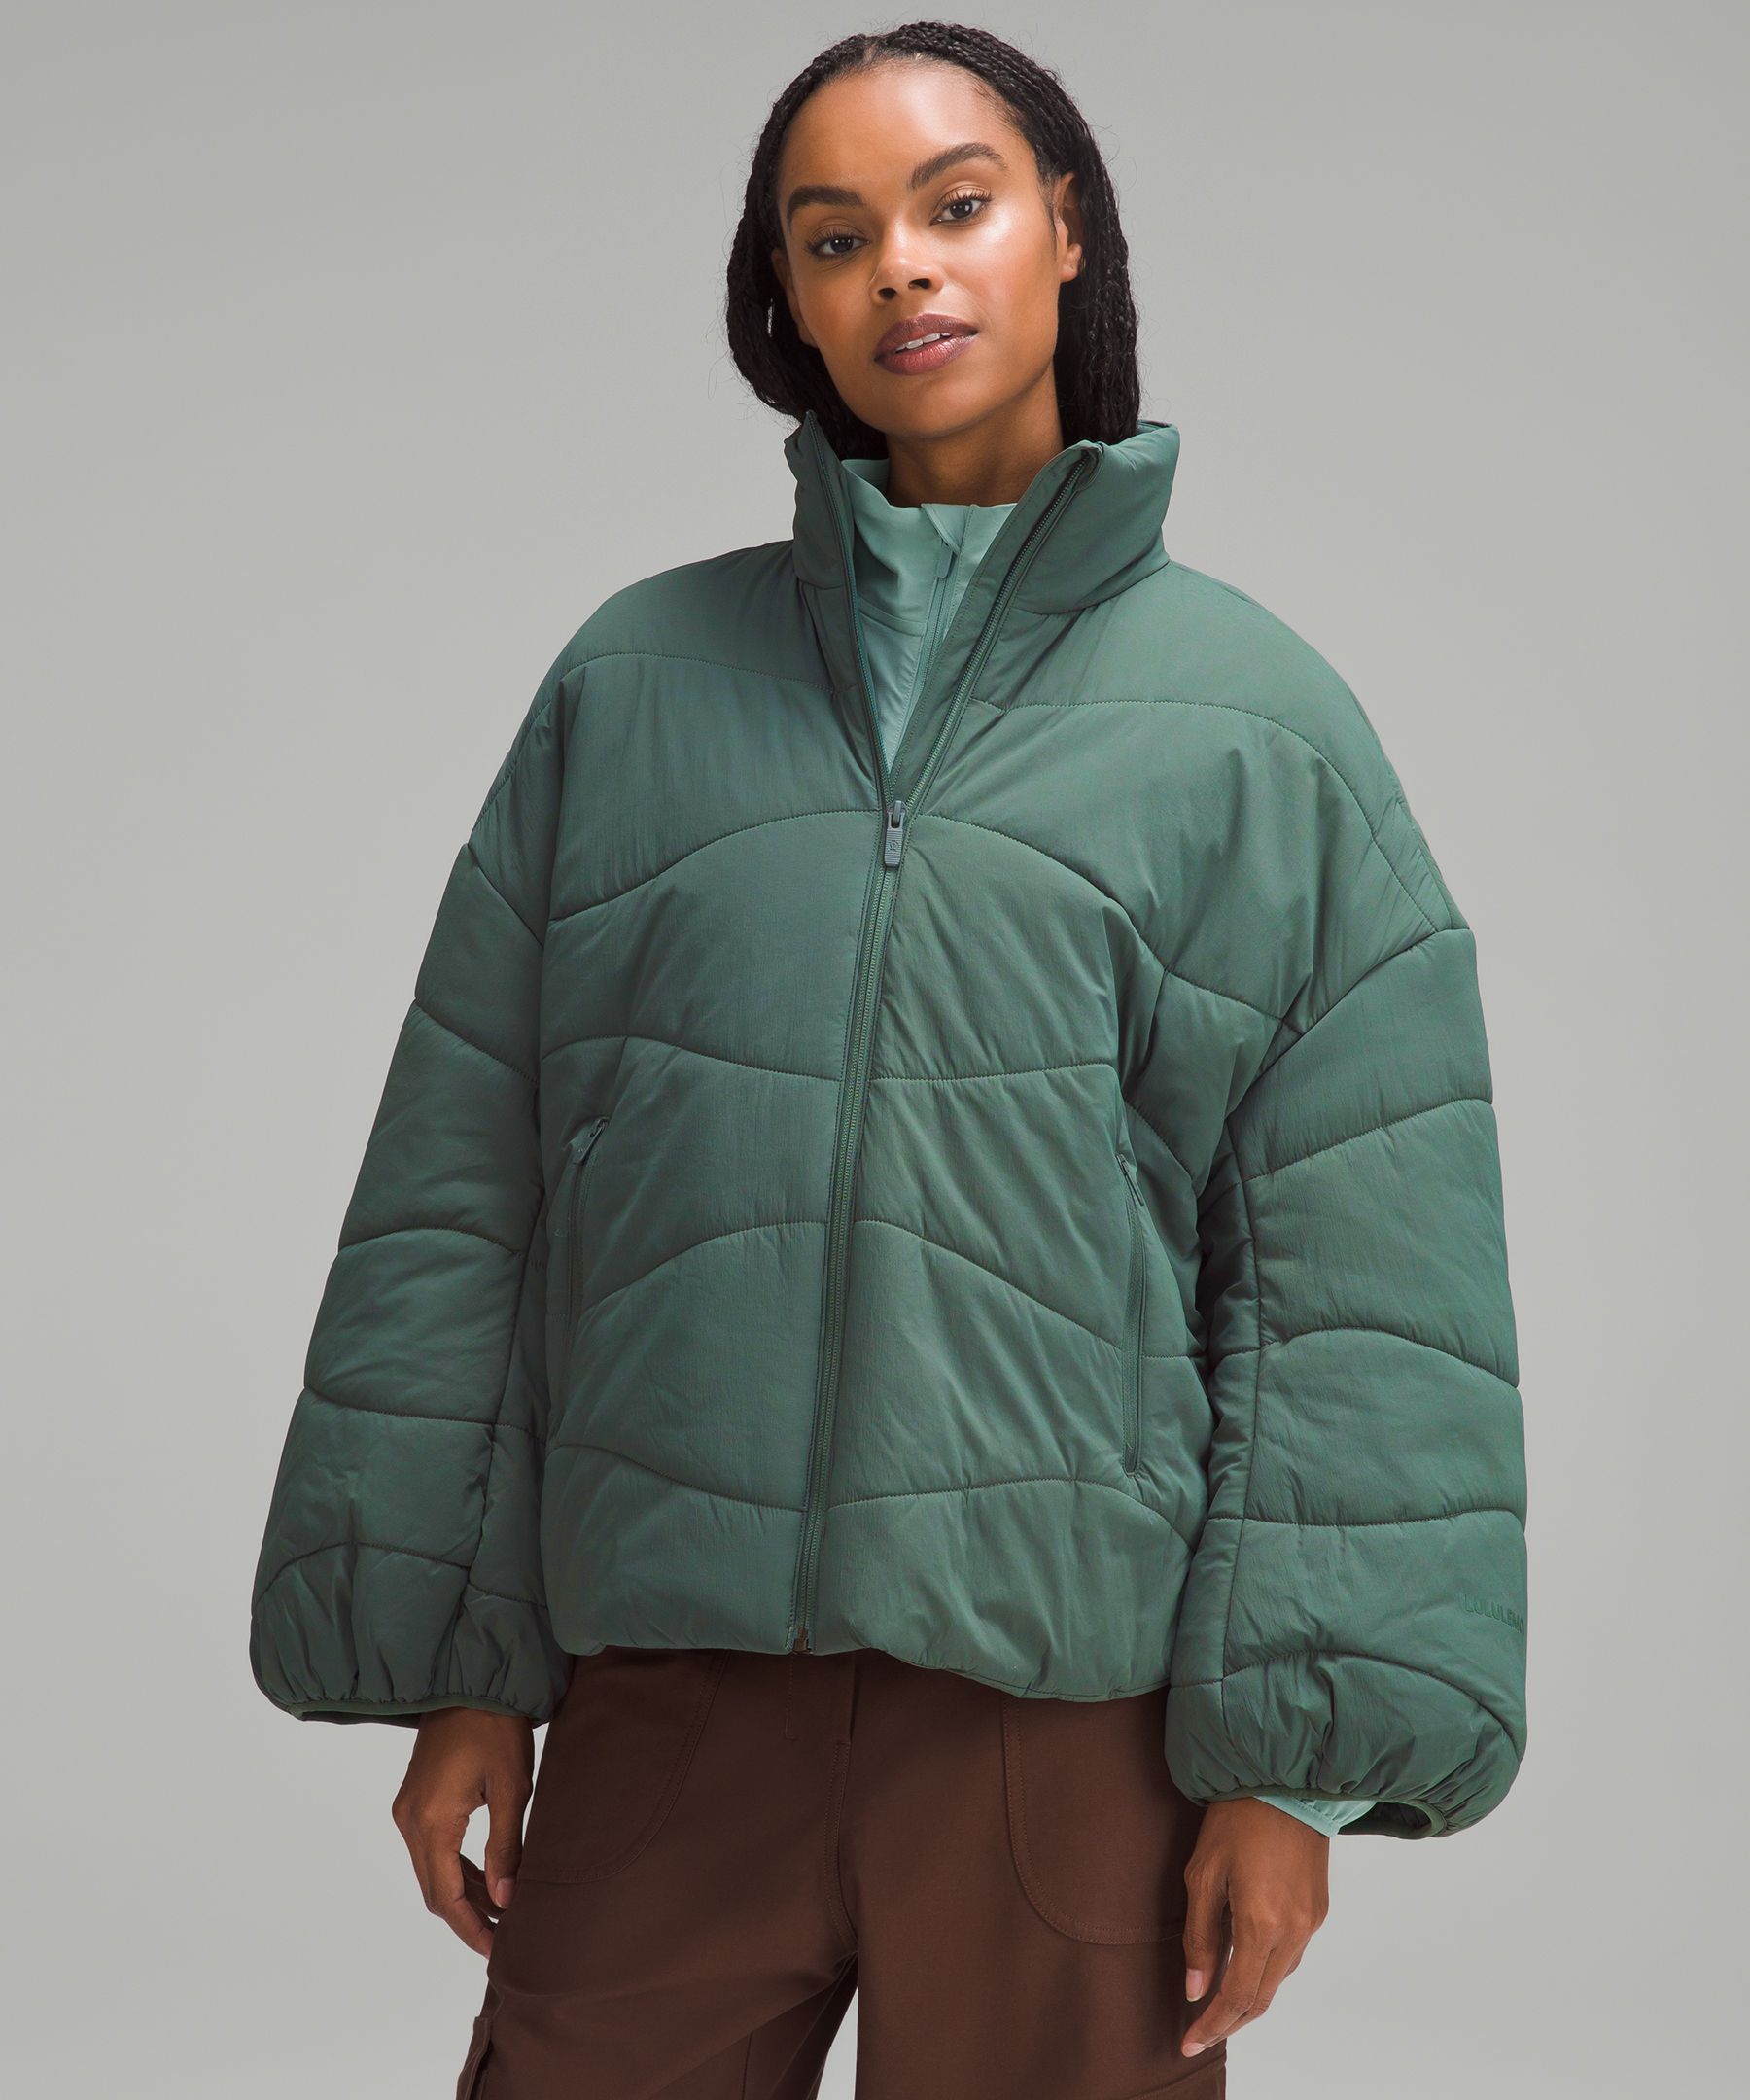 Wave-Quilt Insulated Jacket, Women's Coats & Jackets